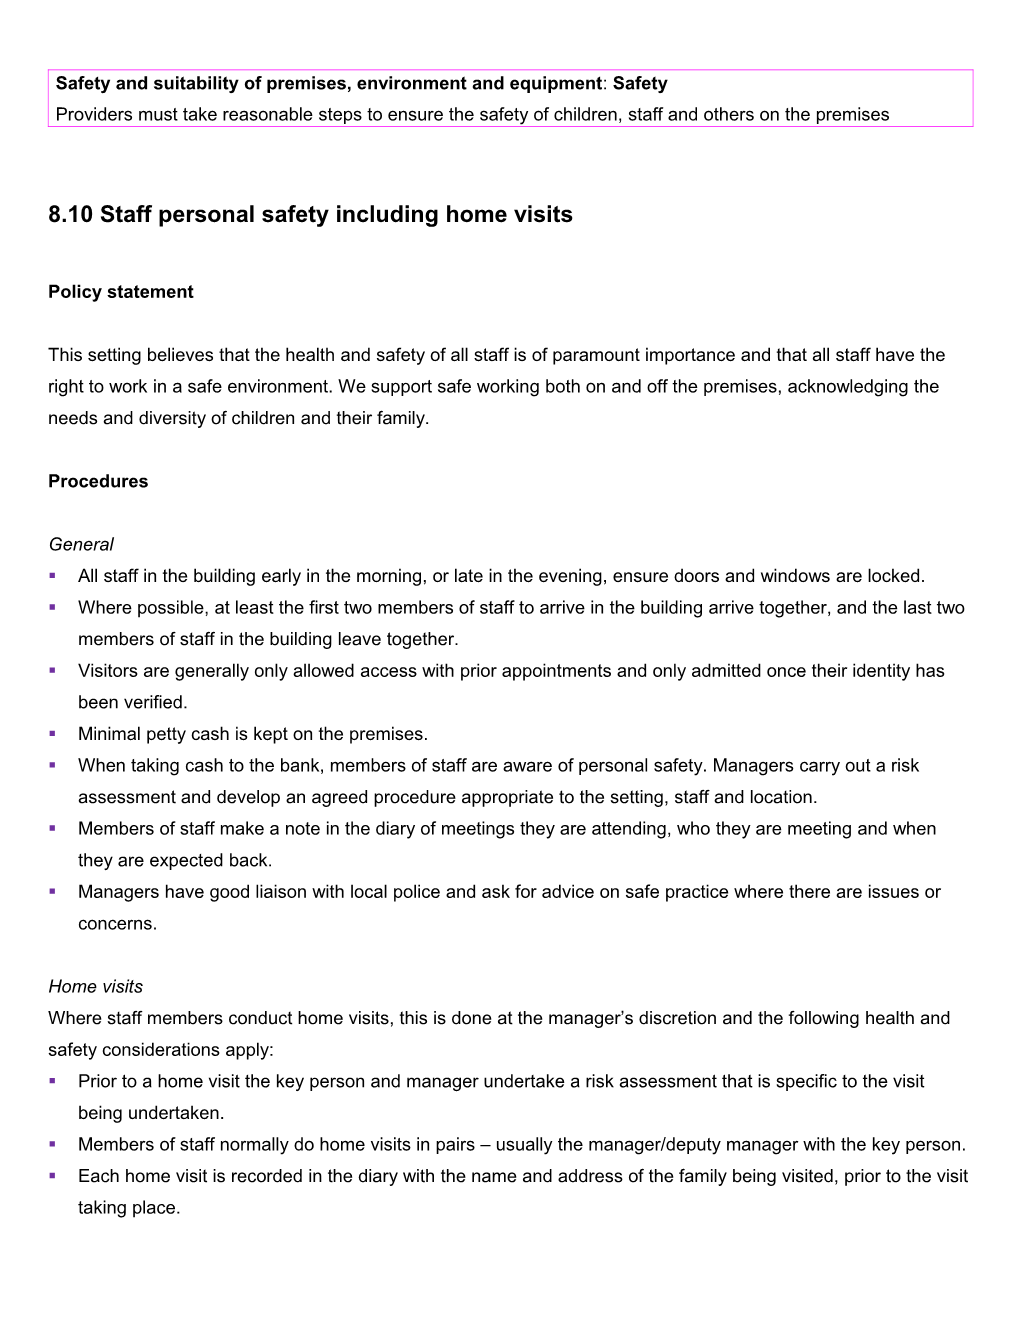 8.10Staff Personal Safety Including Home Visits